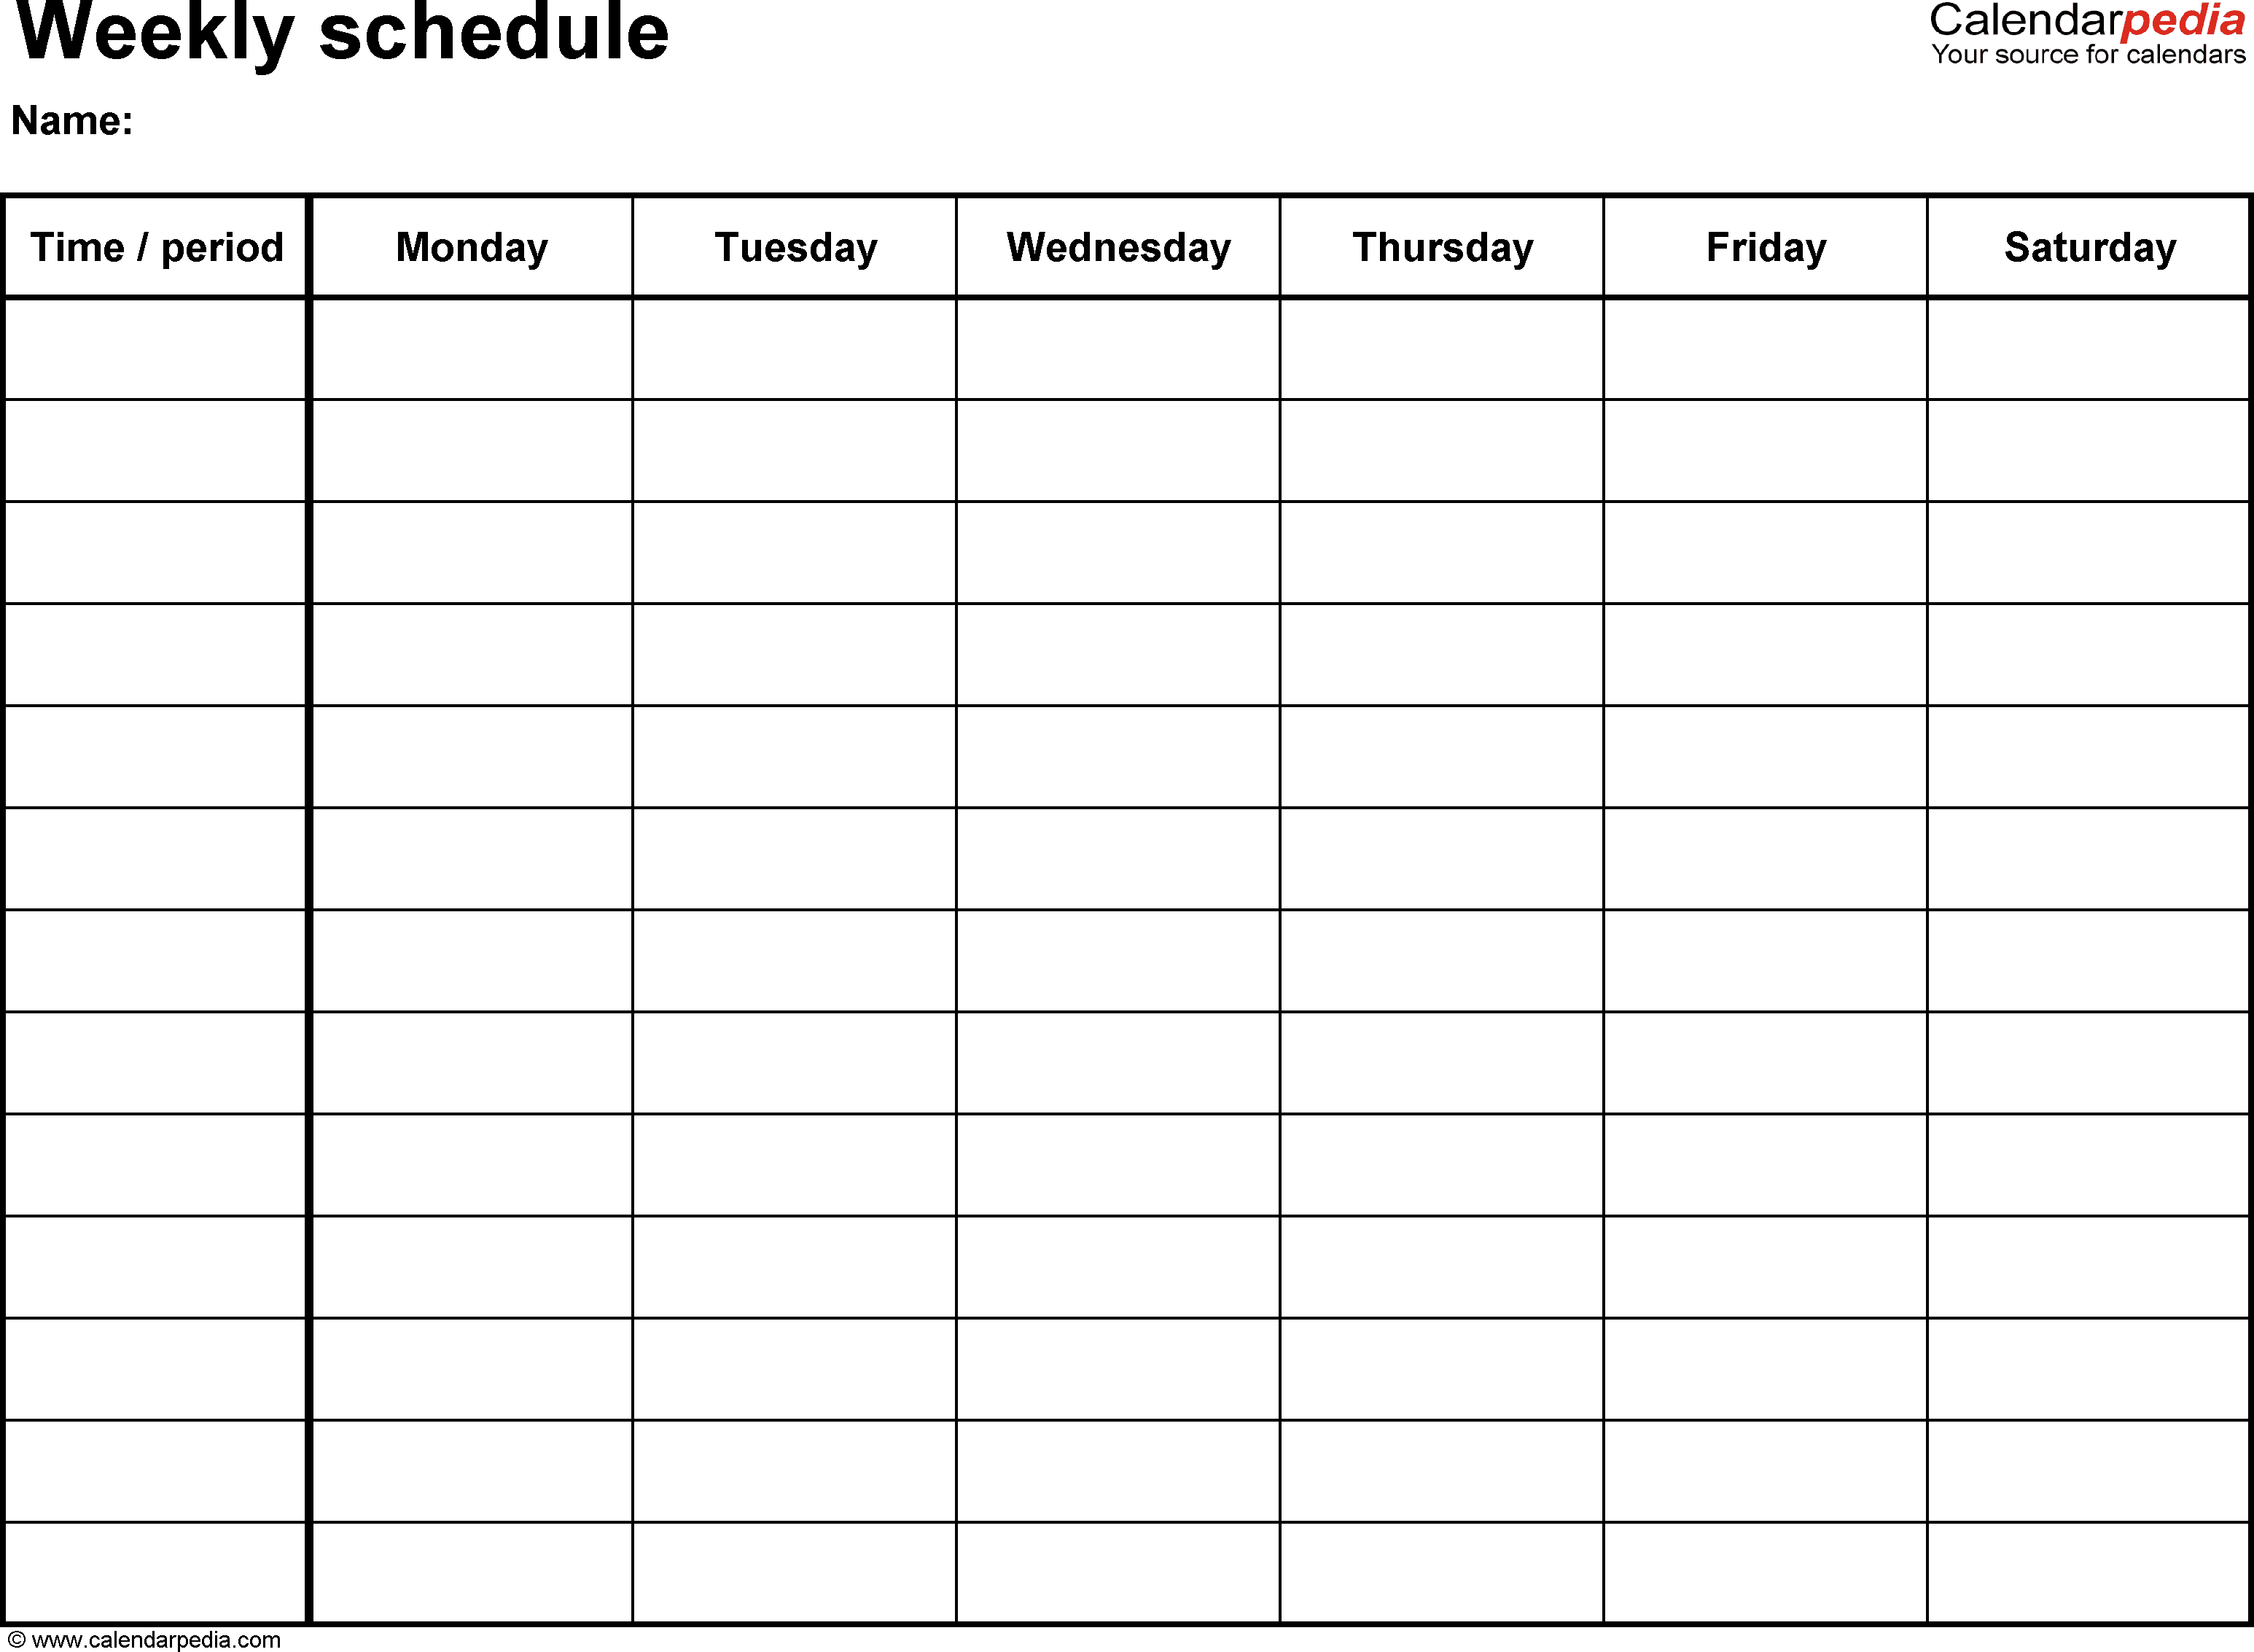 35 Blank Weekly Class Schedule Template Printable Download by Weekly Class Schedule Template Printable